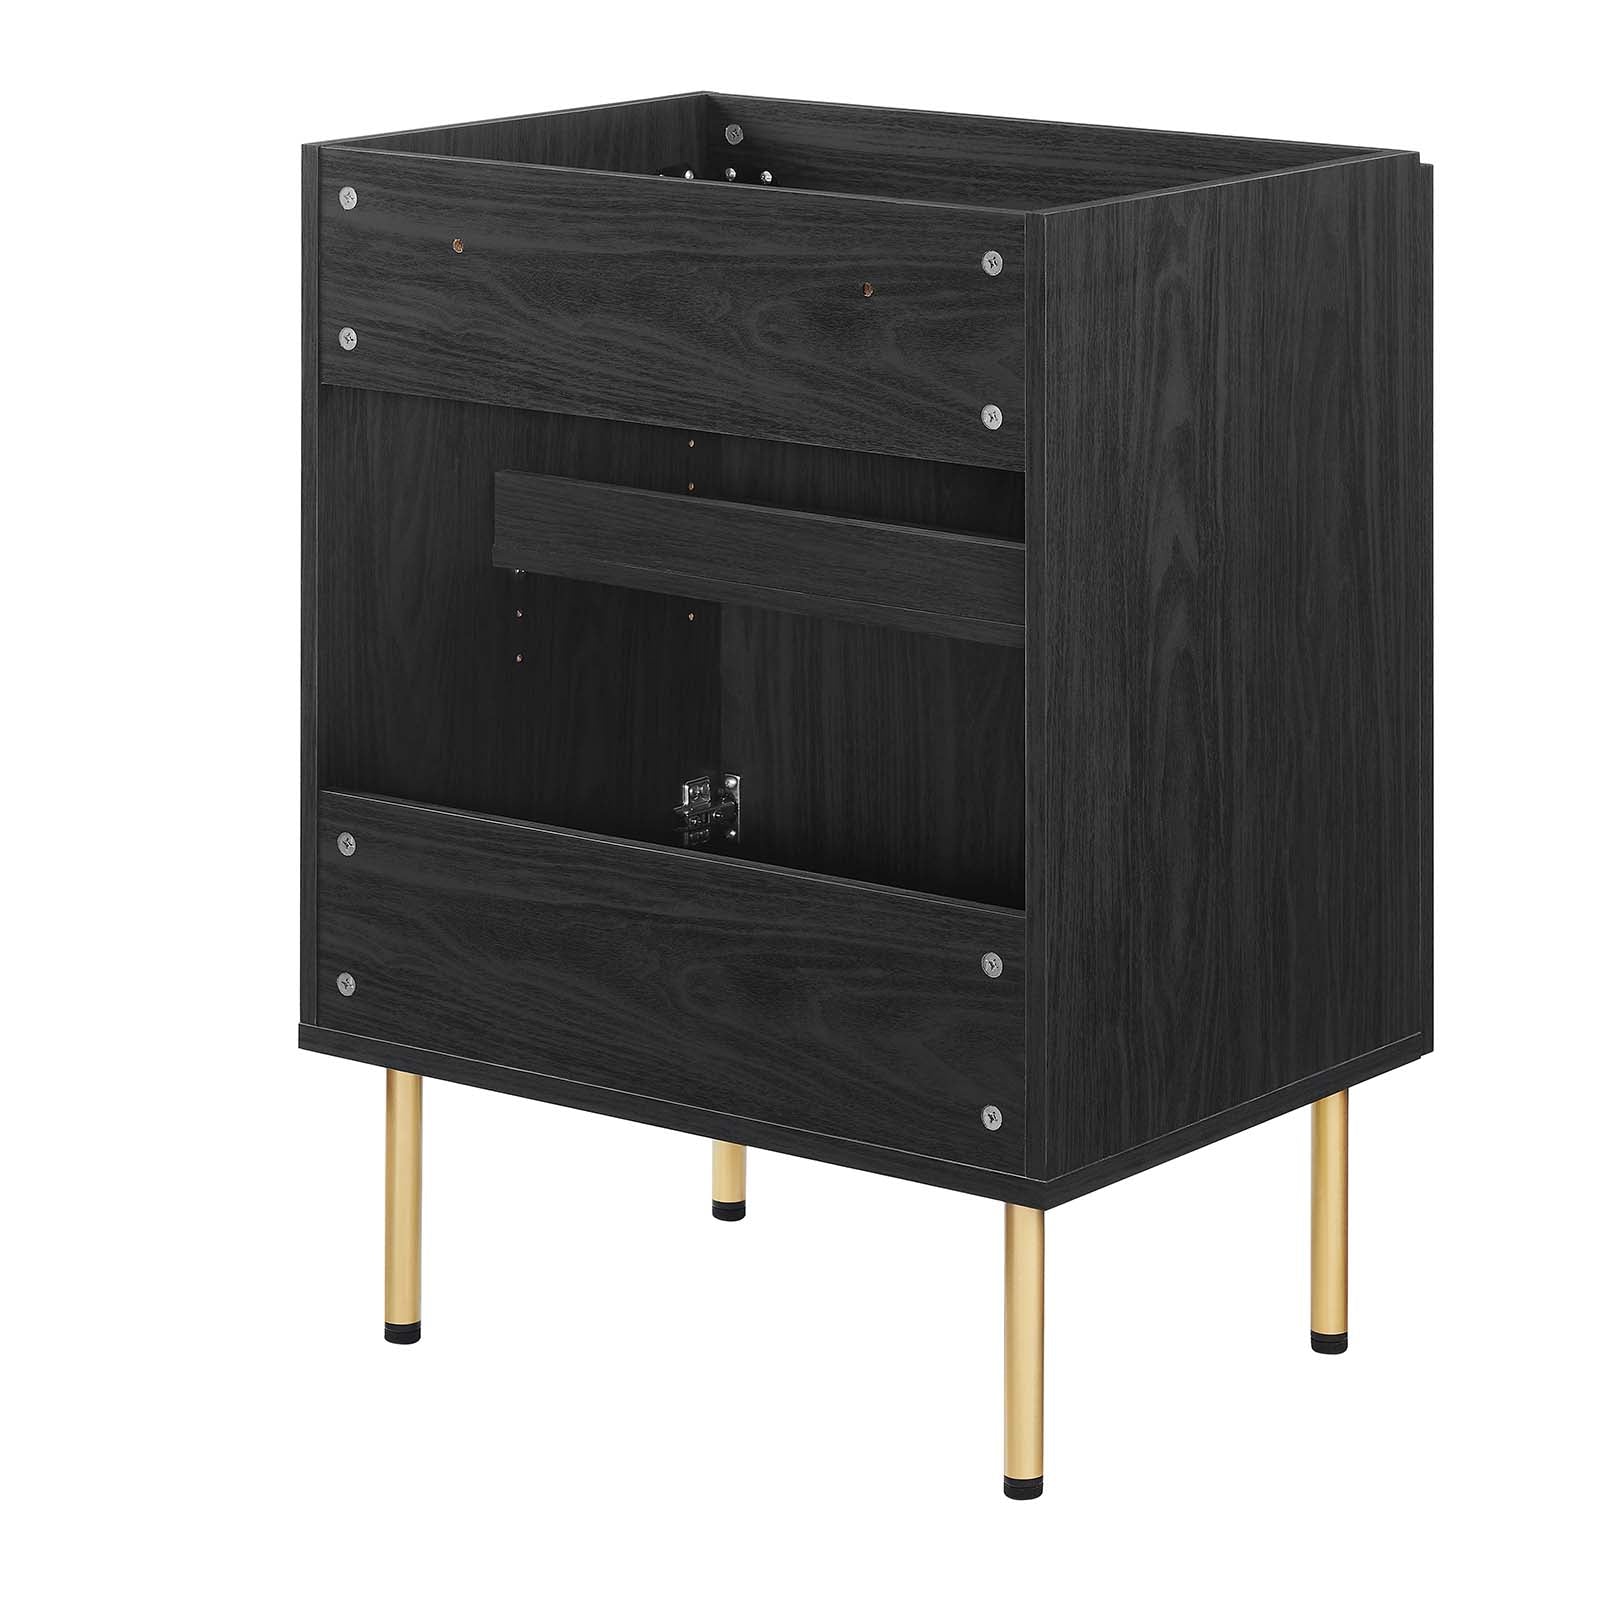 Chaucer 24" Bathroom Vanity Cabinet (Sink Basin Not Included) - East Shore Modern Home Furnishings